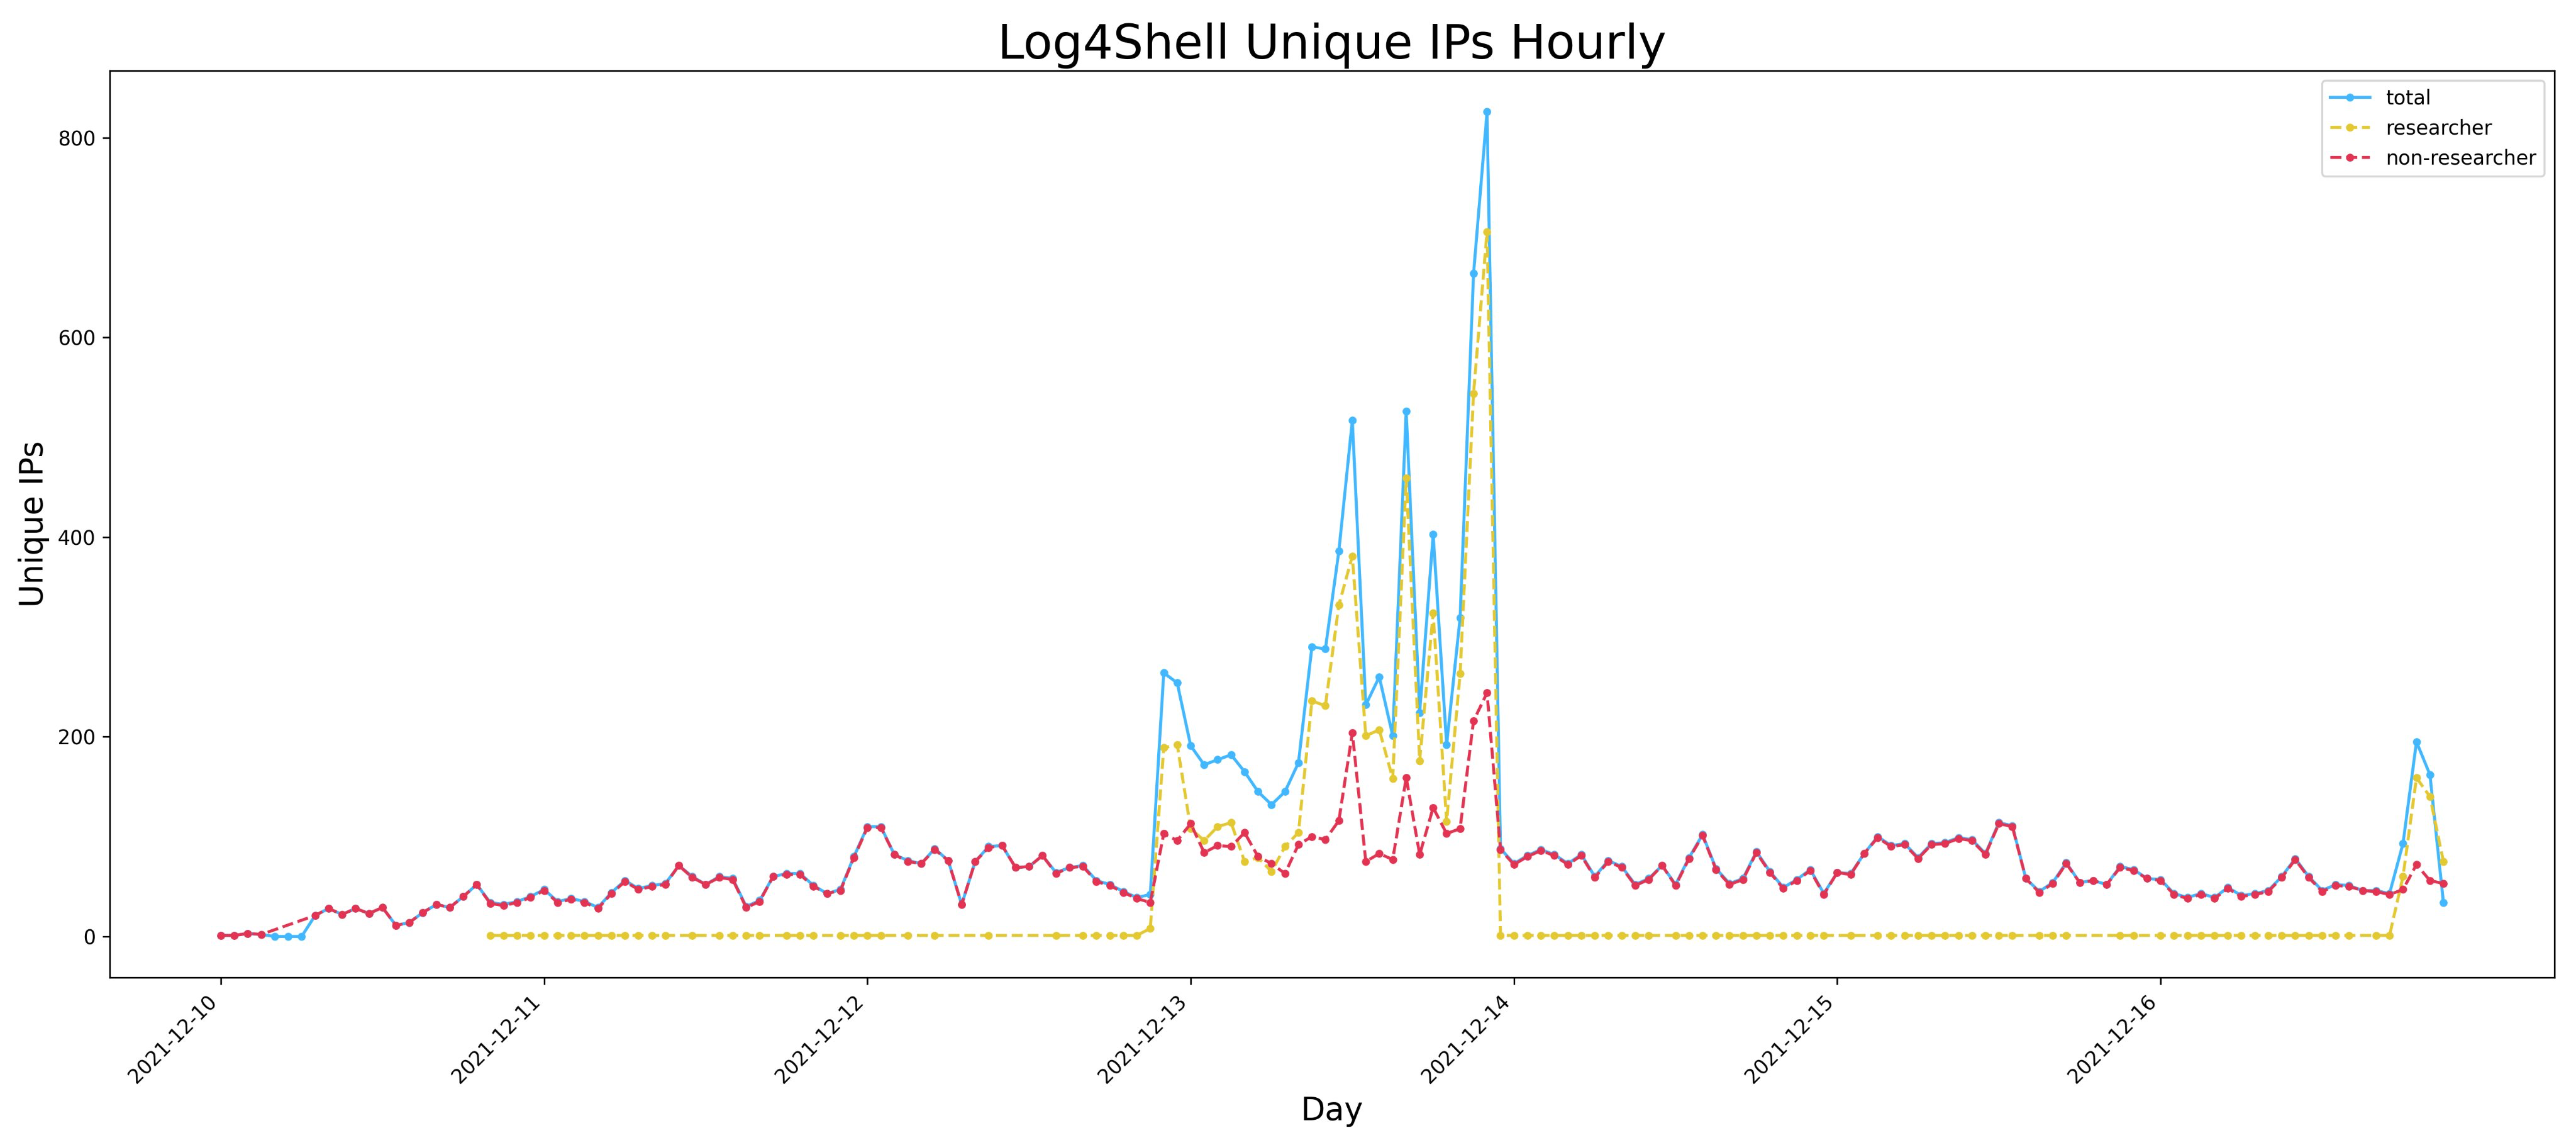 Log4Shell Unique IPs per hour broken down by "research" and "non-research"